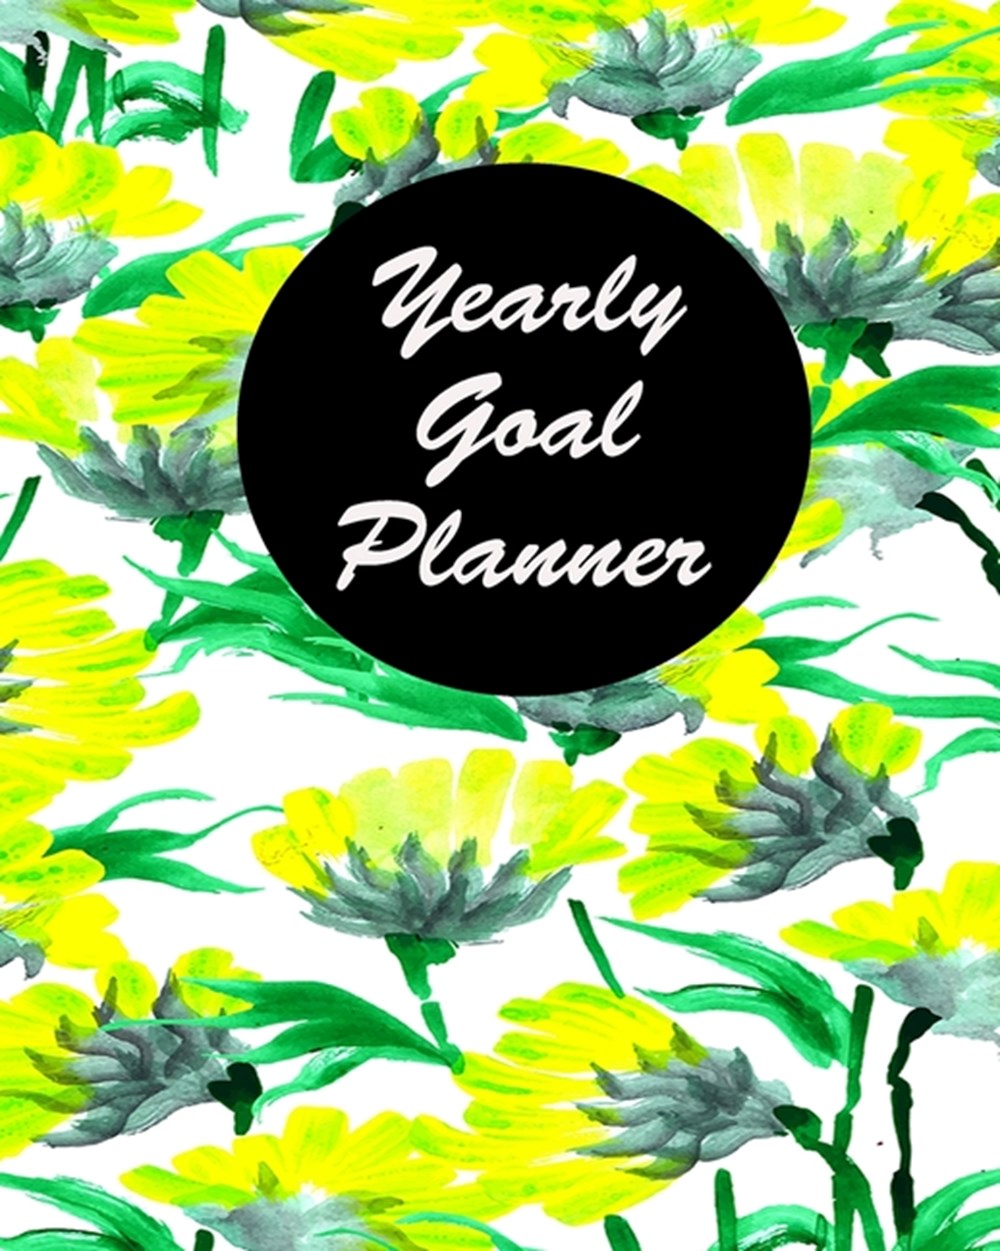 Yearly Goal Planner Yearly Goal Planner Undated 12 Months Goal Planner - 8 x 10 -120 Pages - Boss CE